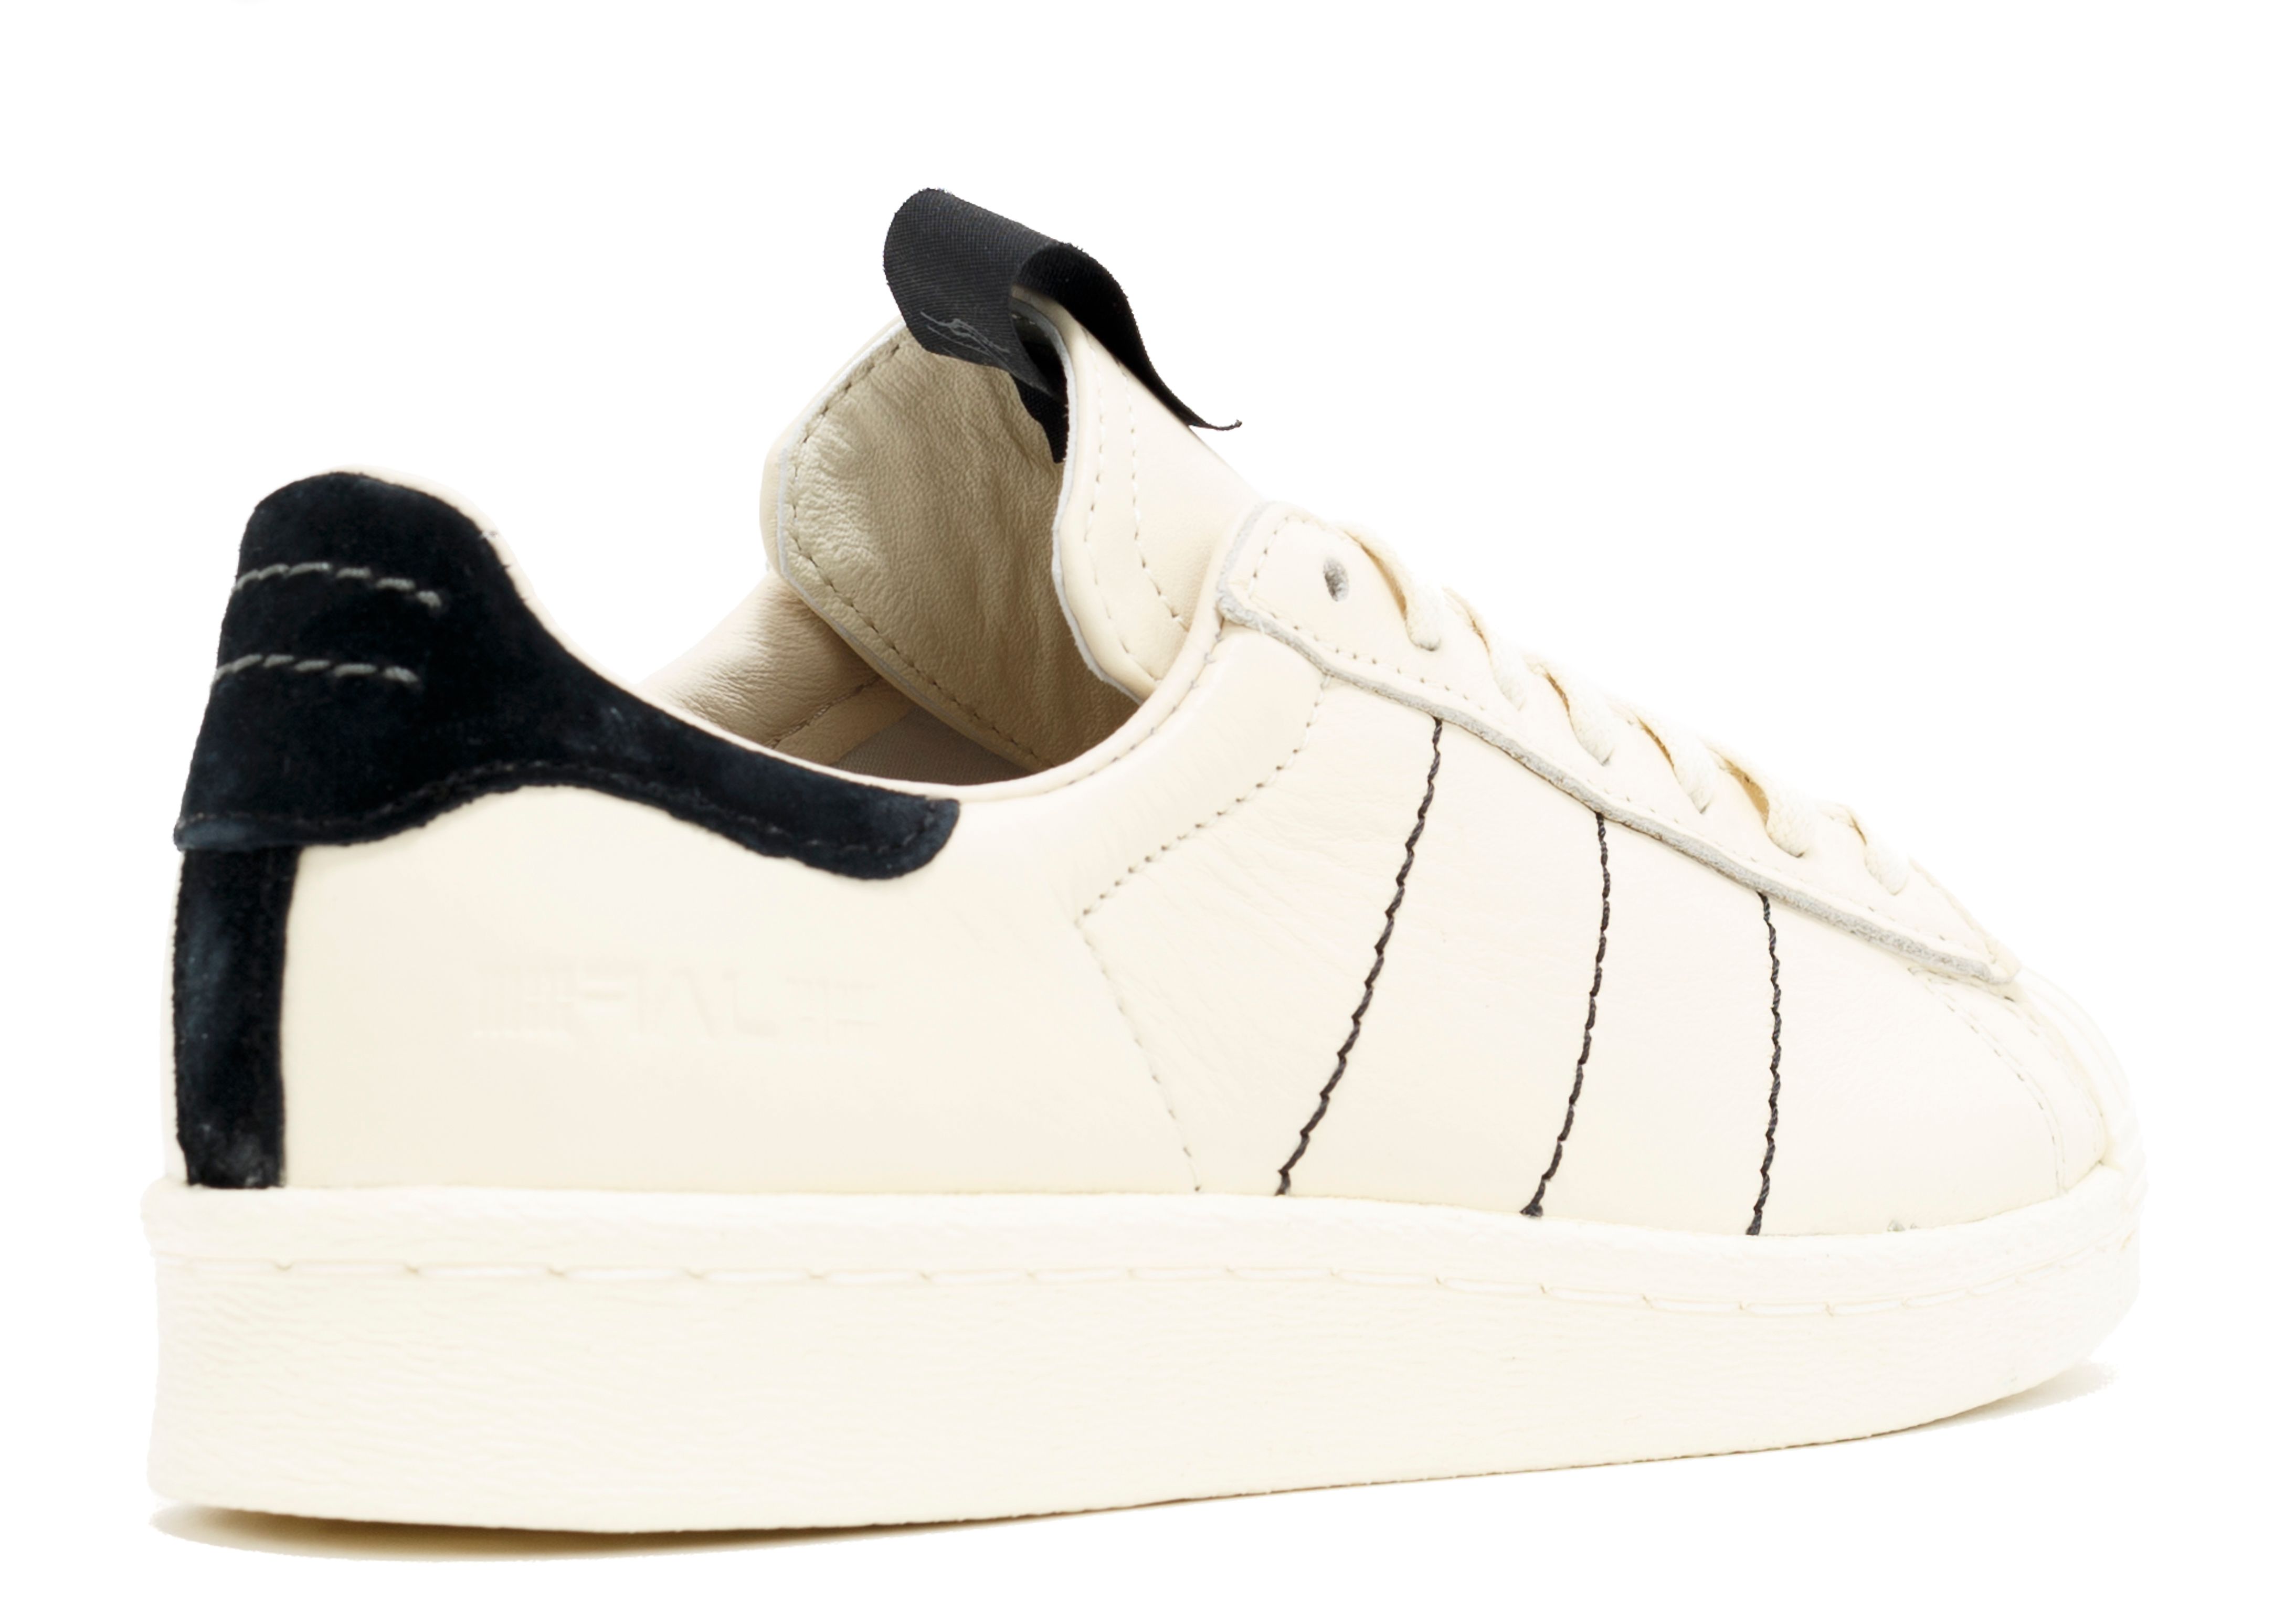 Did You Pick Up The Cheap Adidas Superstar Boost Noble Metal Kicks On Fire